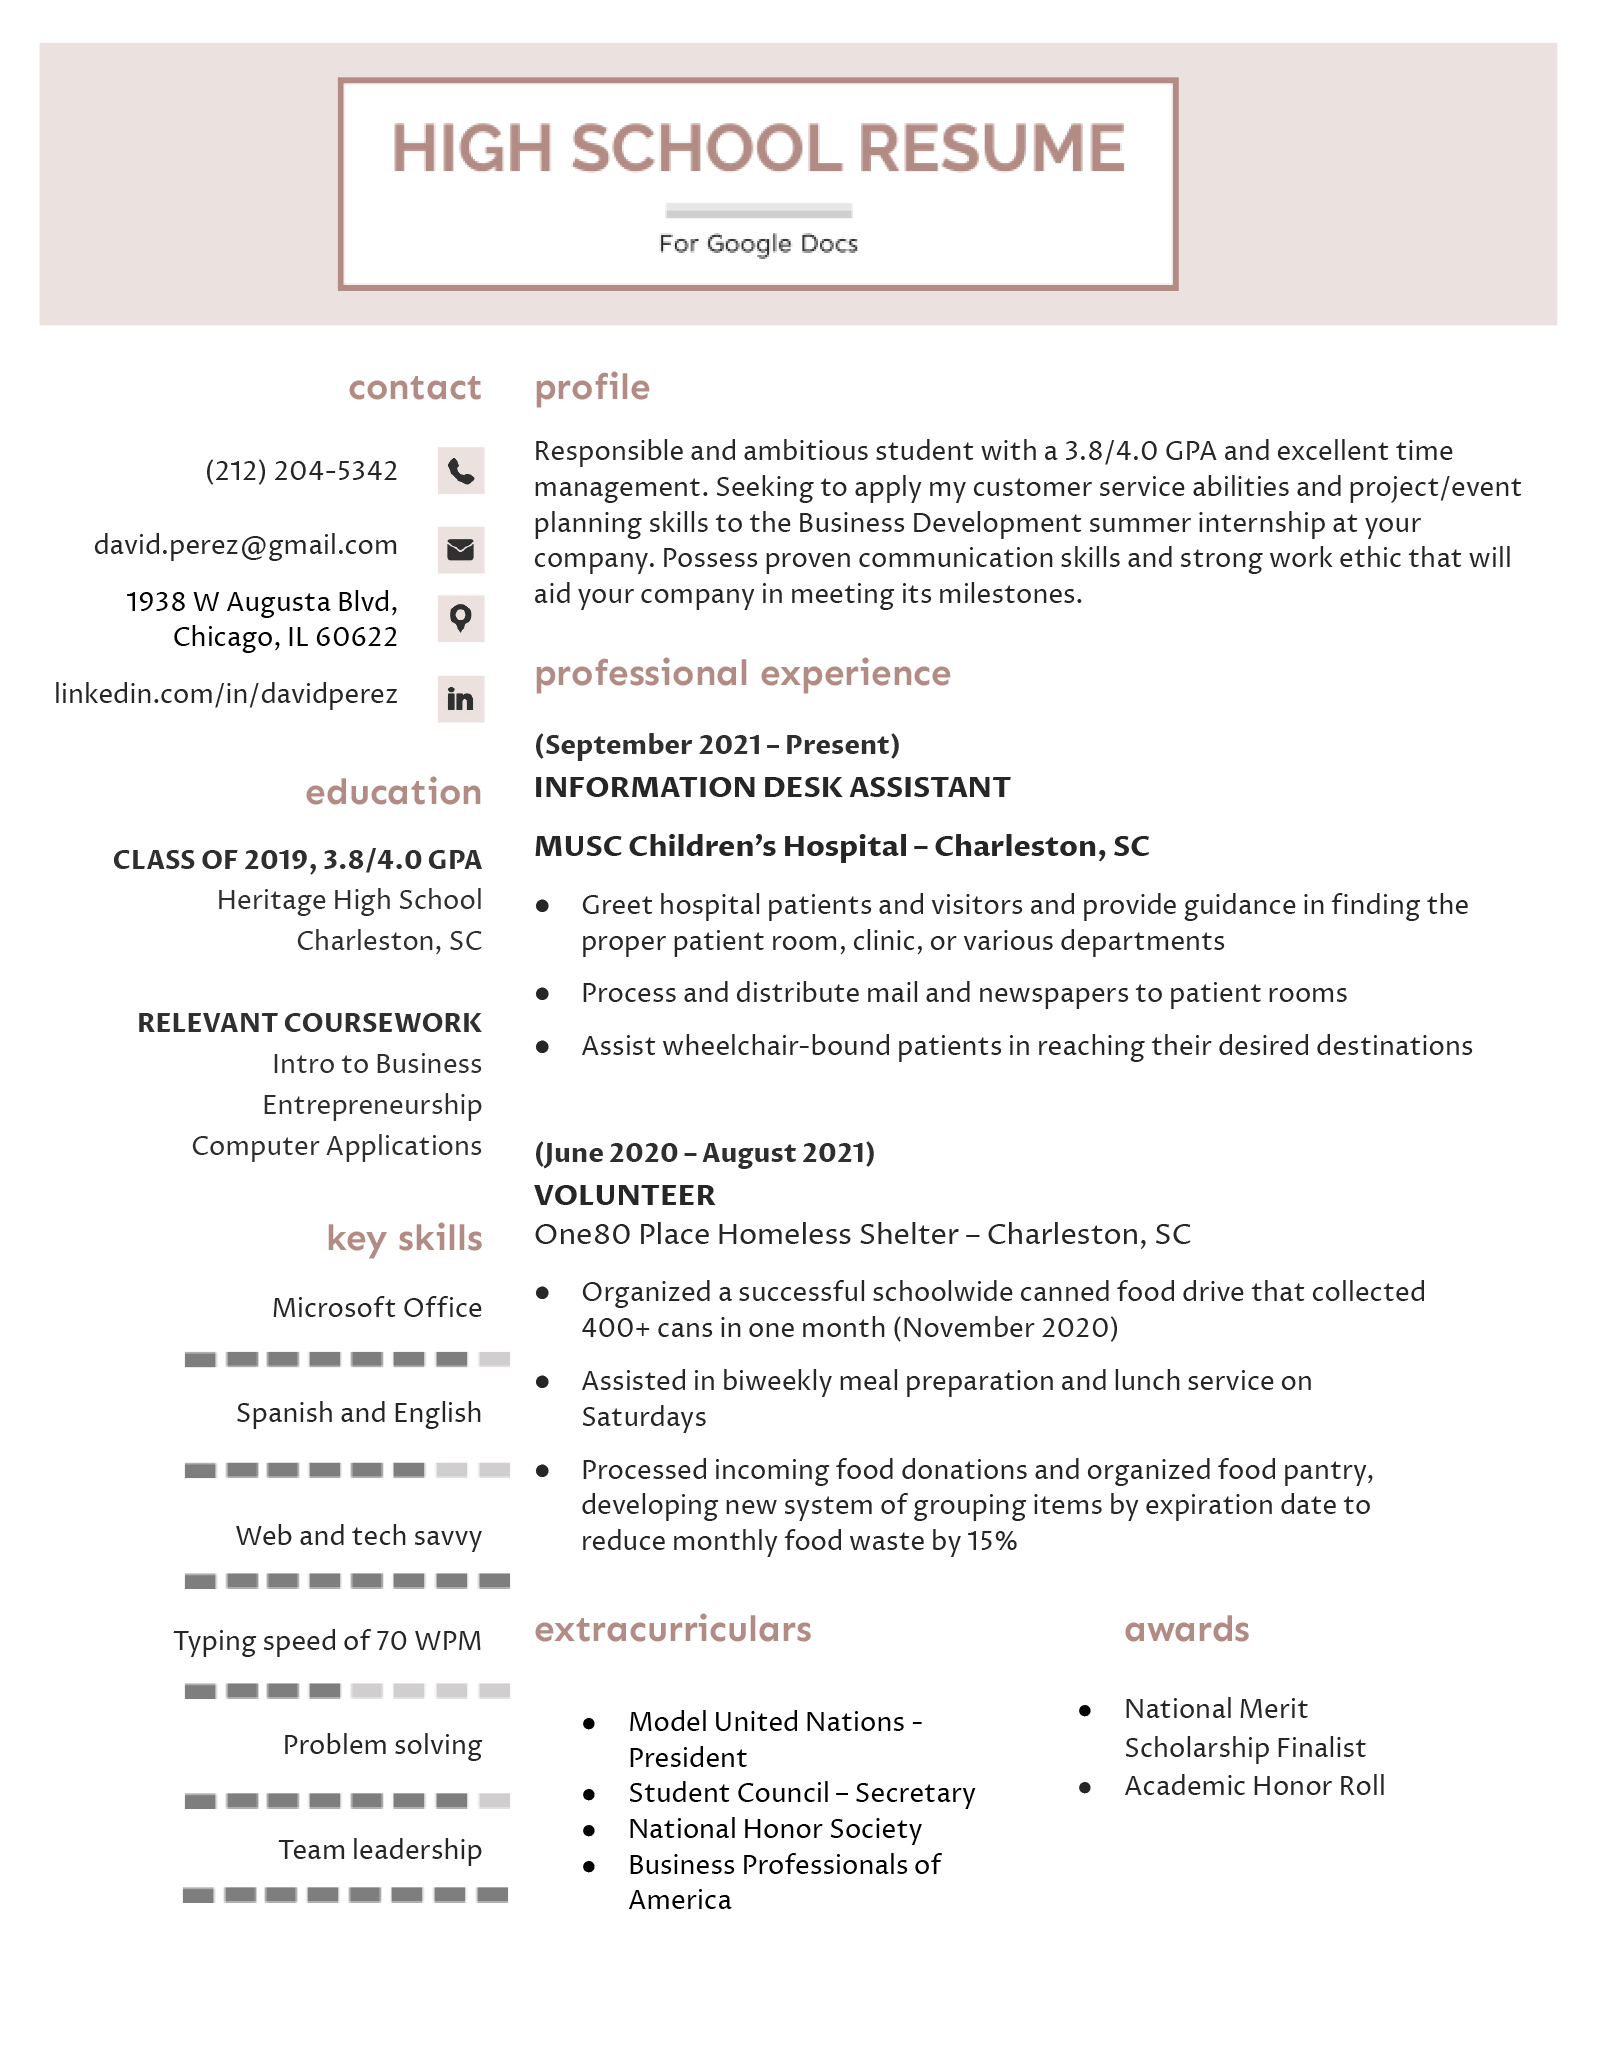 A high school resume template for Google Docs, featuring extra sections for extracurricular activities and volunteer experience